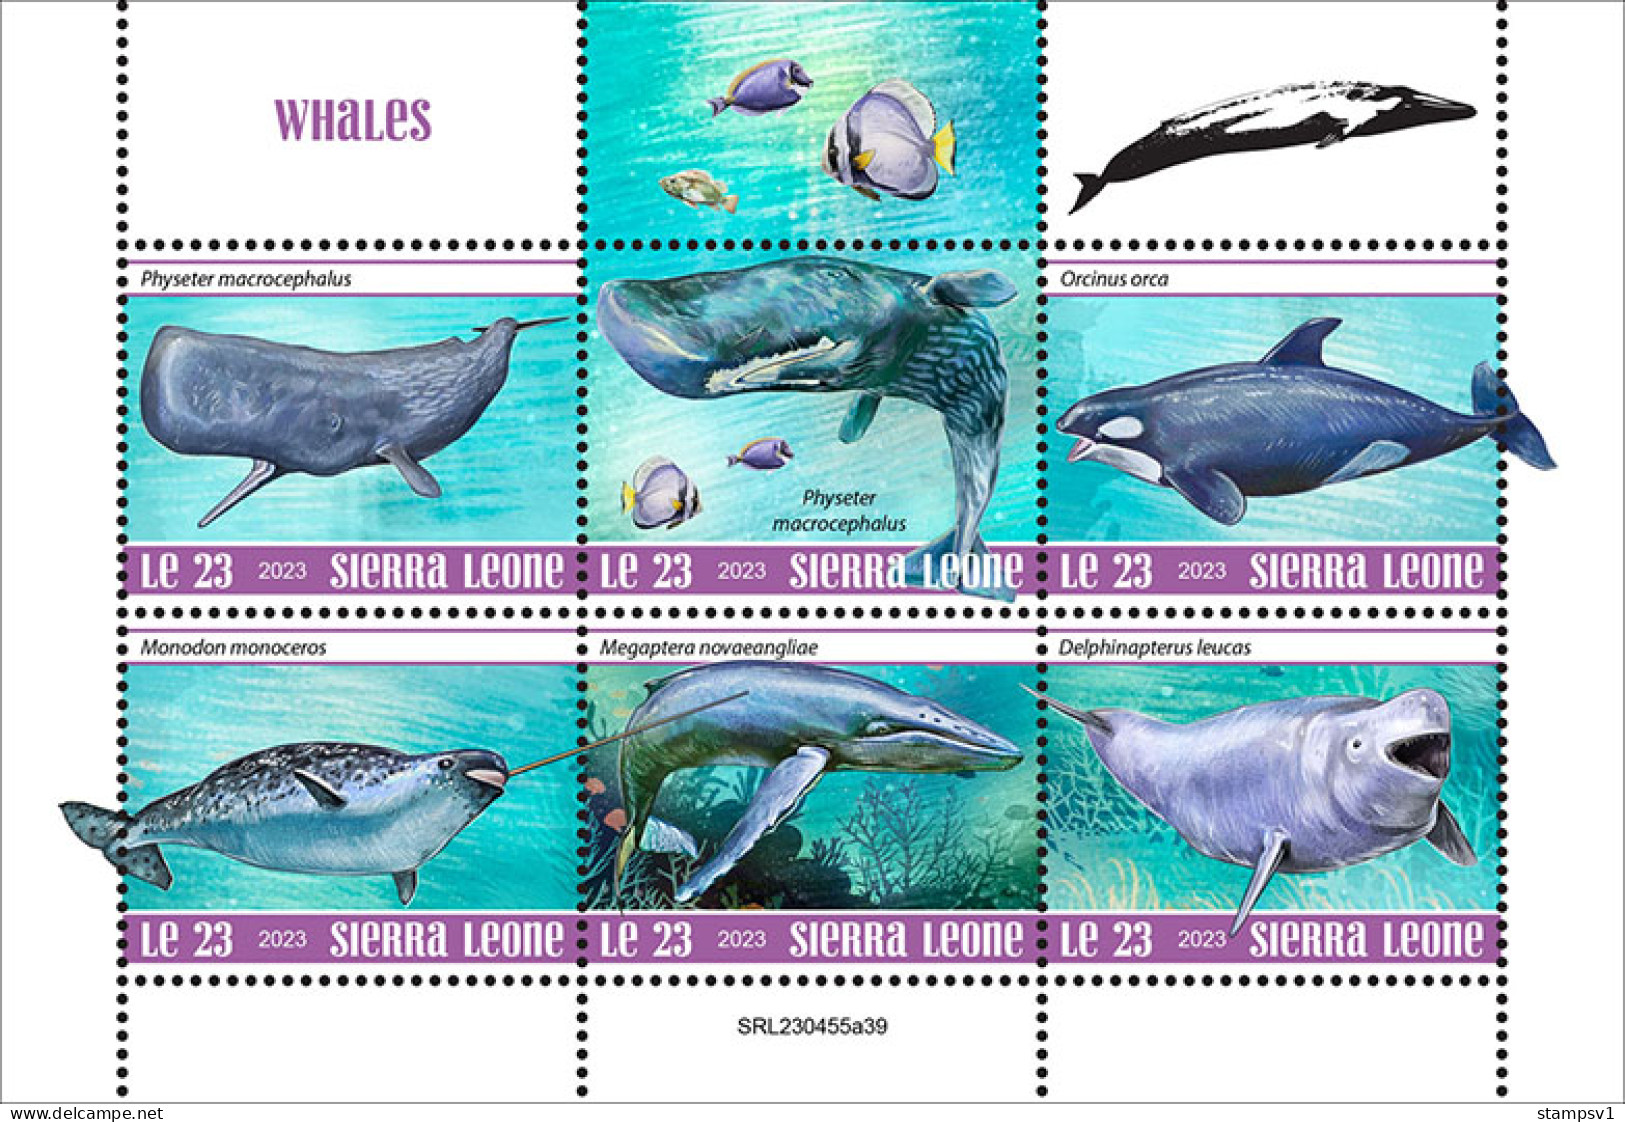 Sierra Leone  2023 Whales. (445a39) OFFICIAL ISSUE - Whales